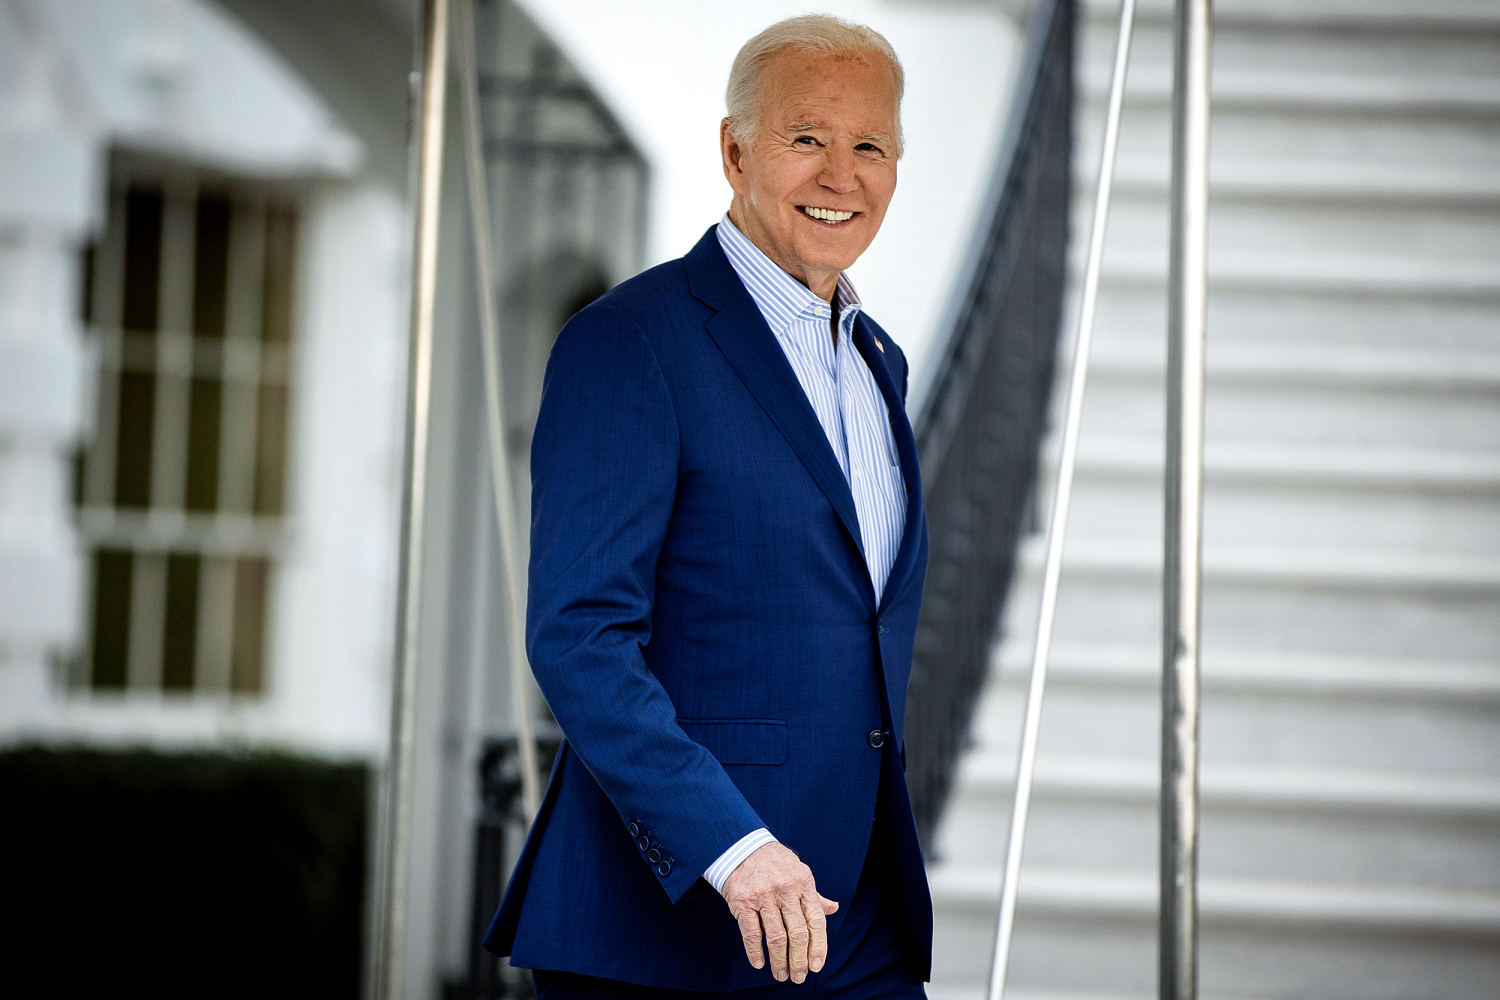 South Carolina Democrats head to the polls, where Biden is expected to notch a primary win